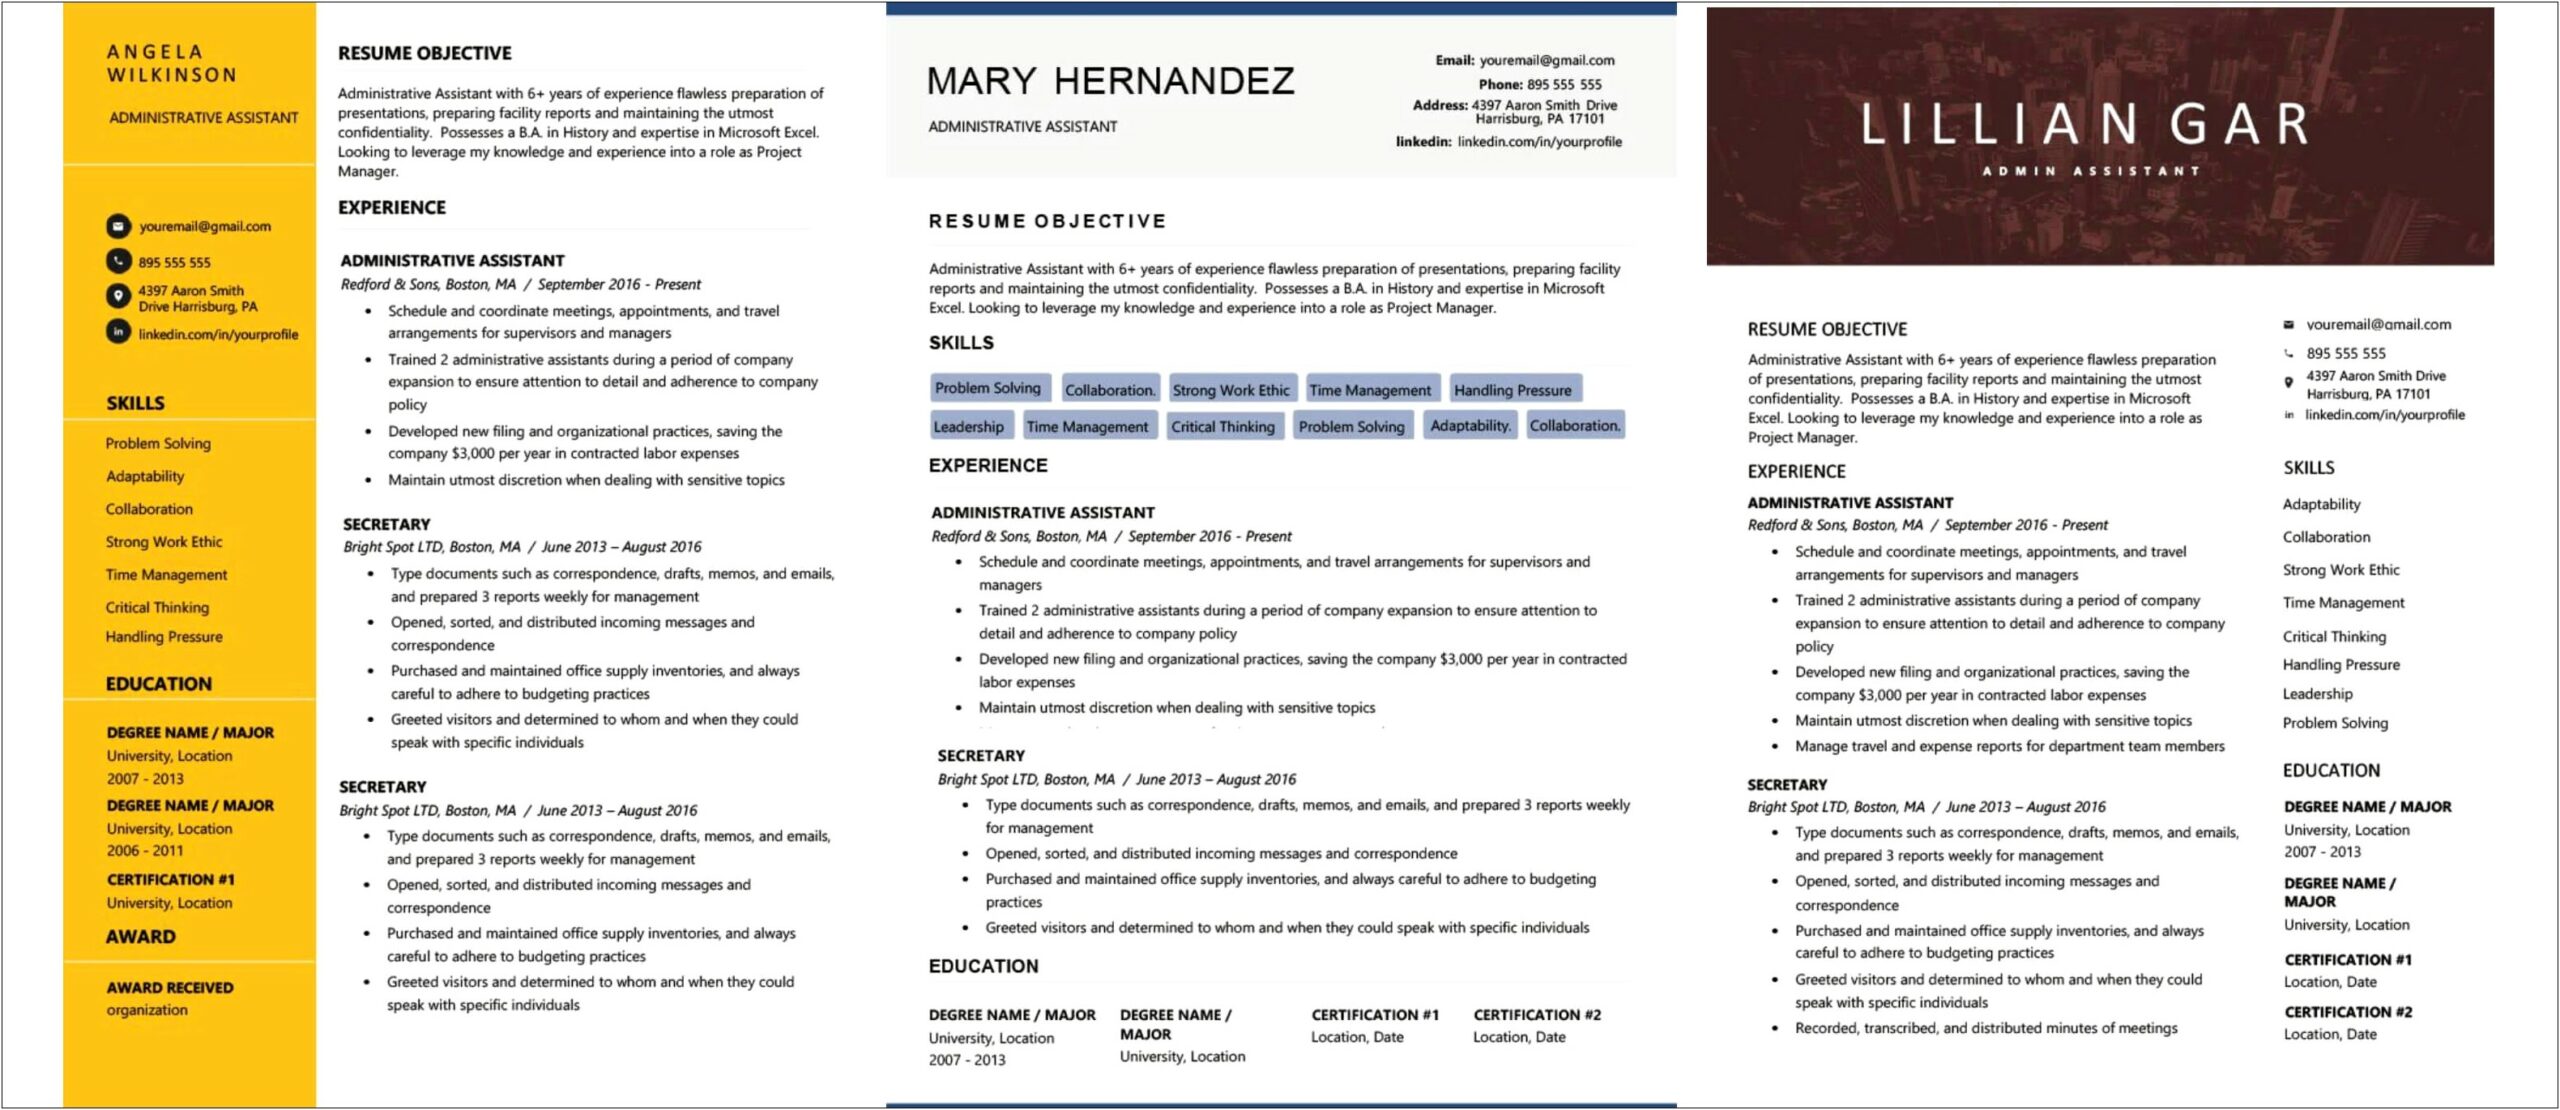 Sample Resume With Certifications Listed